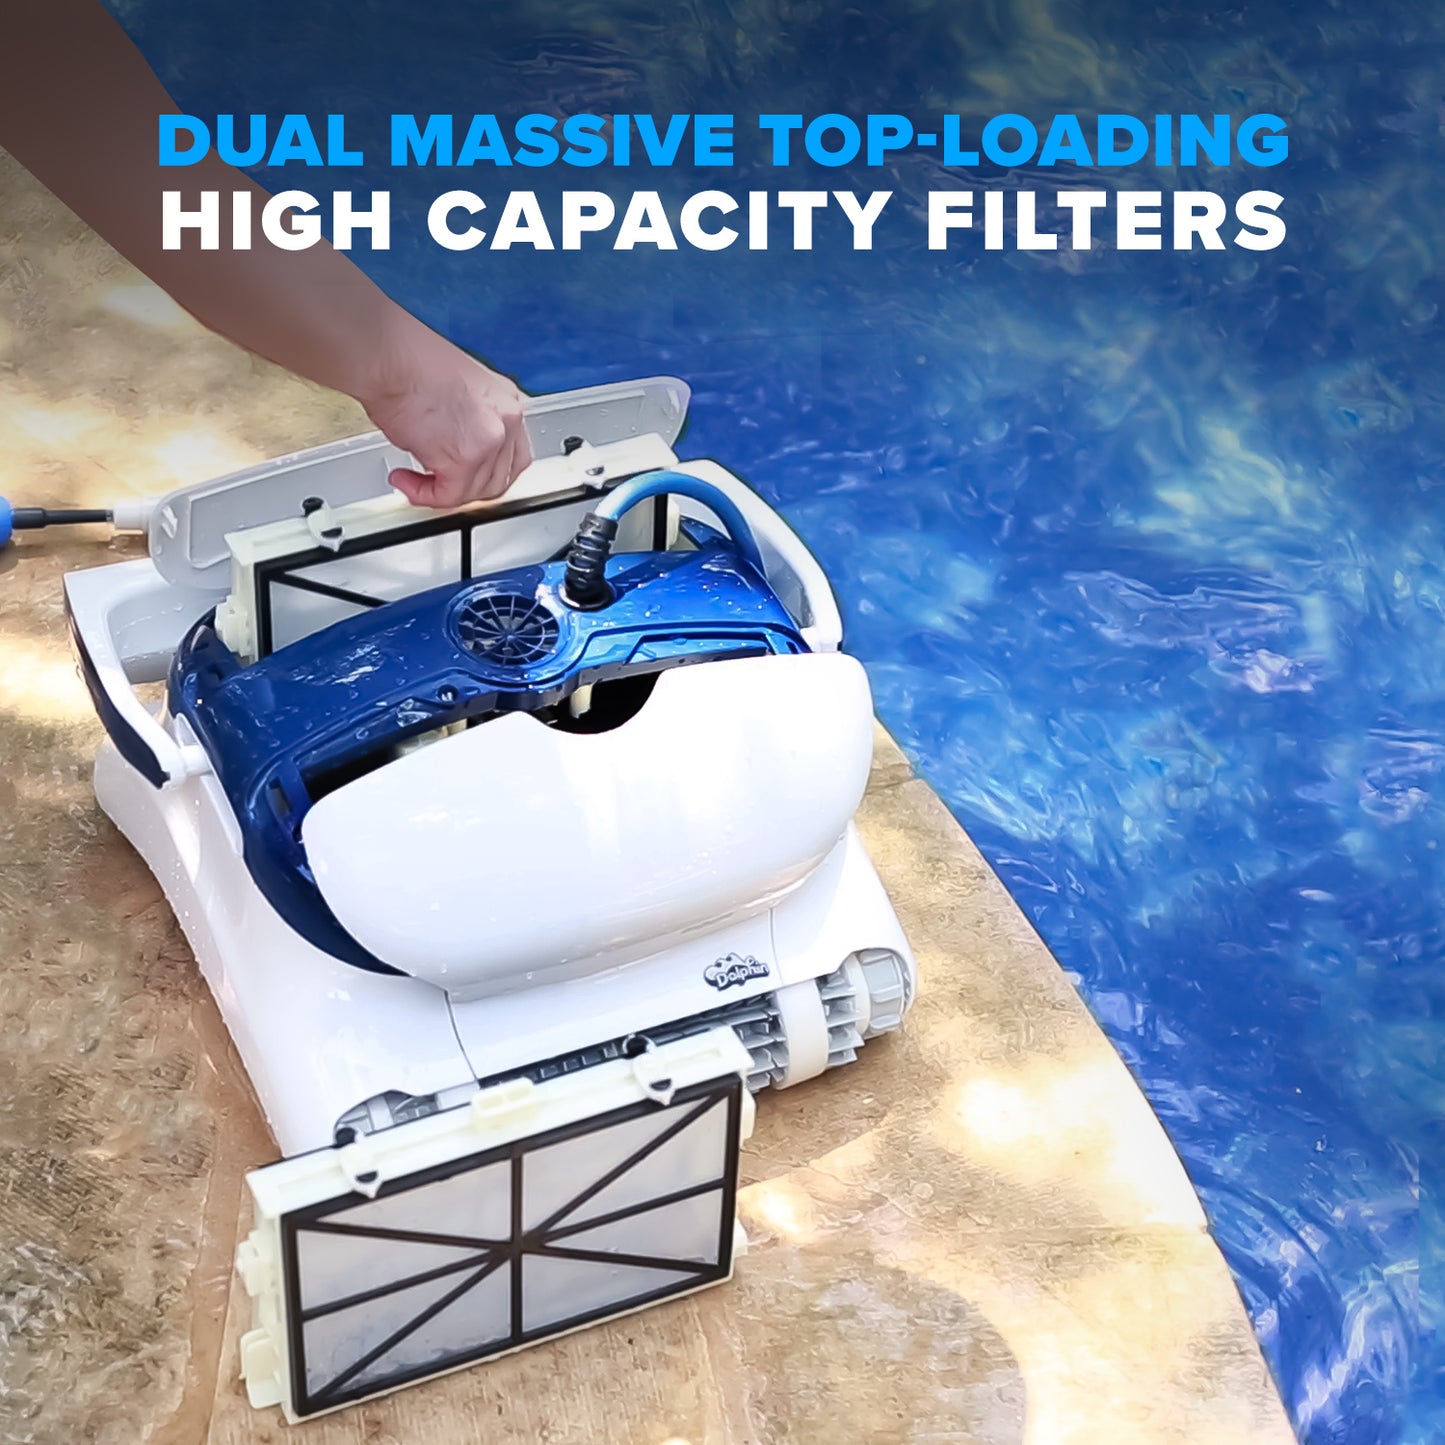 Dolphin Sigma Robotic Pool Cleaner - Open Box Buy